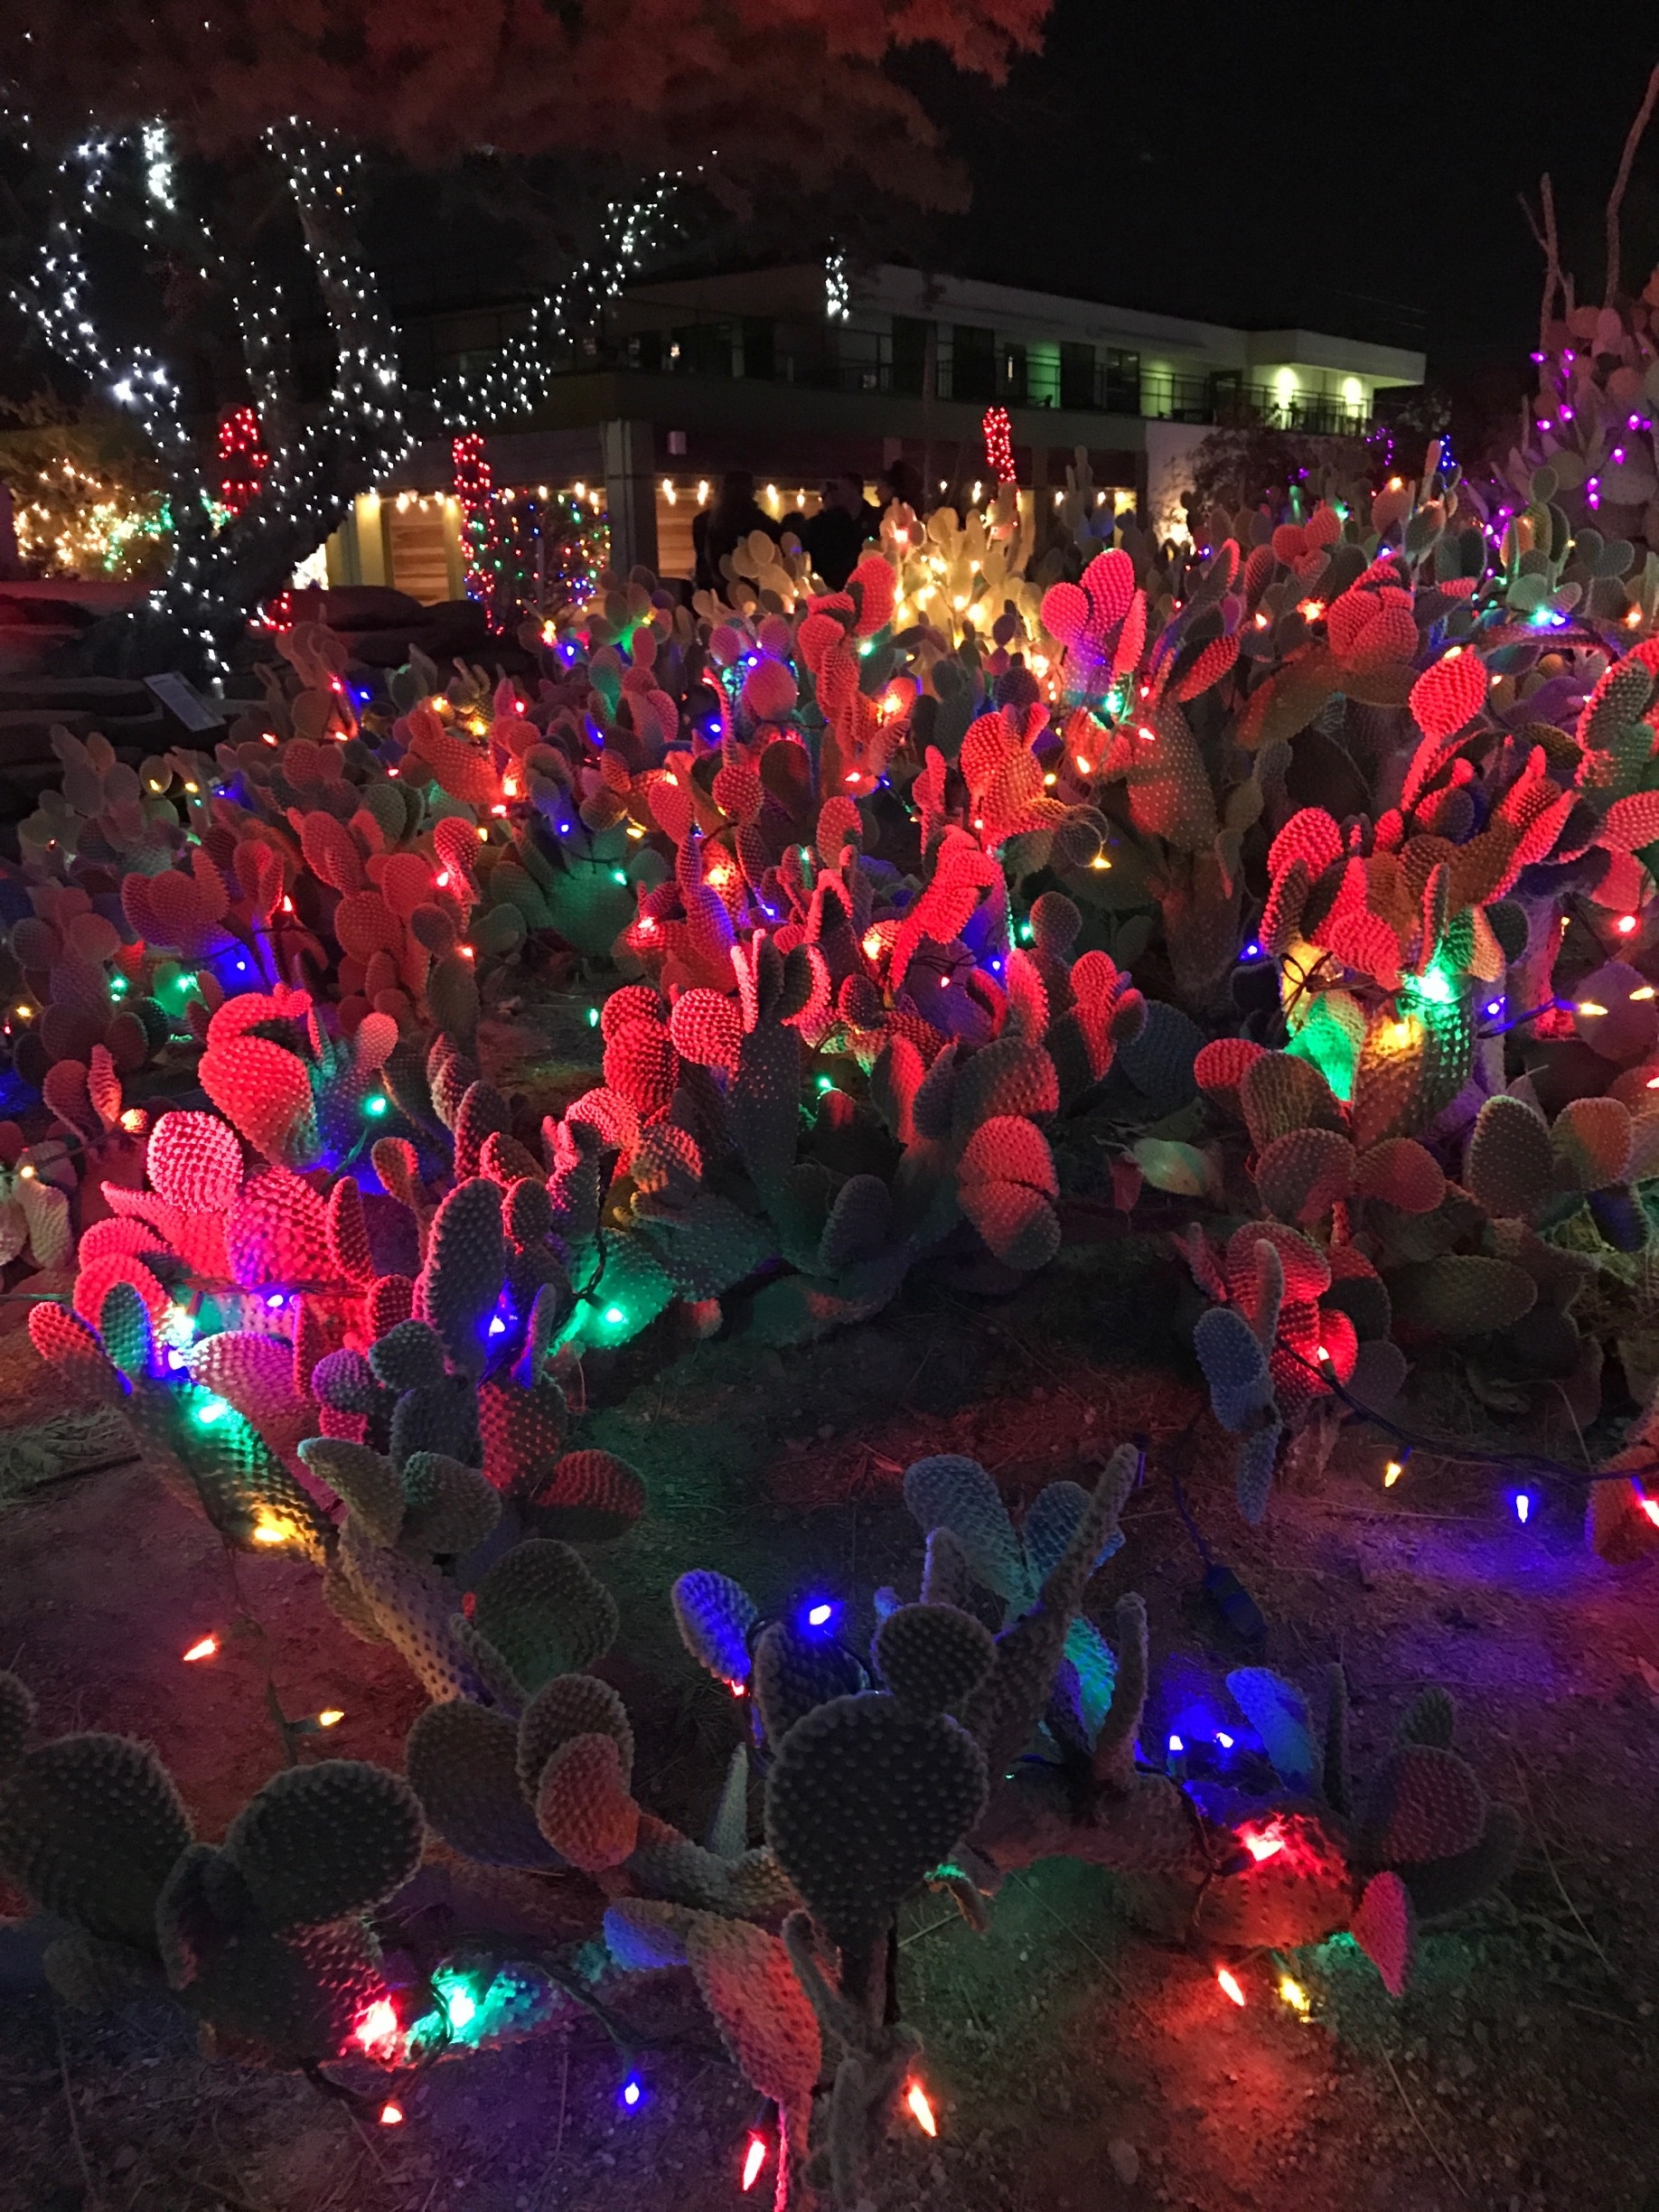 The cactus garden at Ethel M. Factory in Las Vegas decorates for the holiday season to create a desert winter wonderland.  